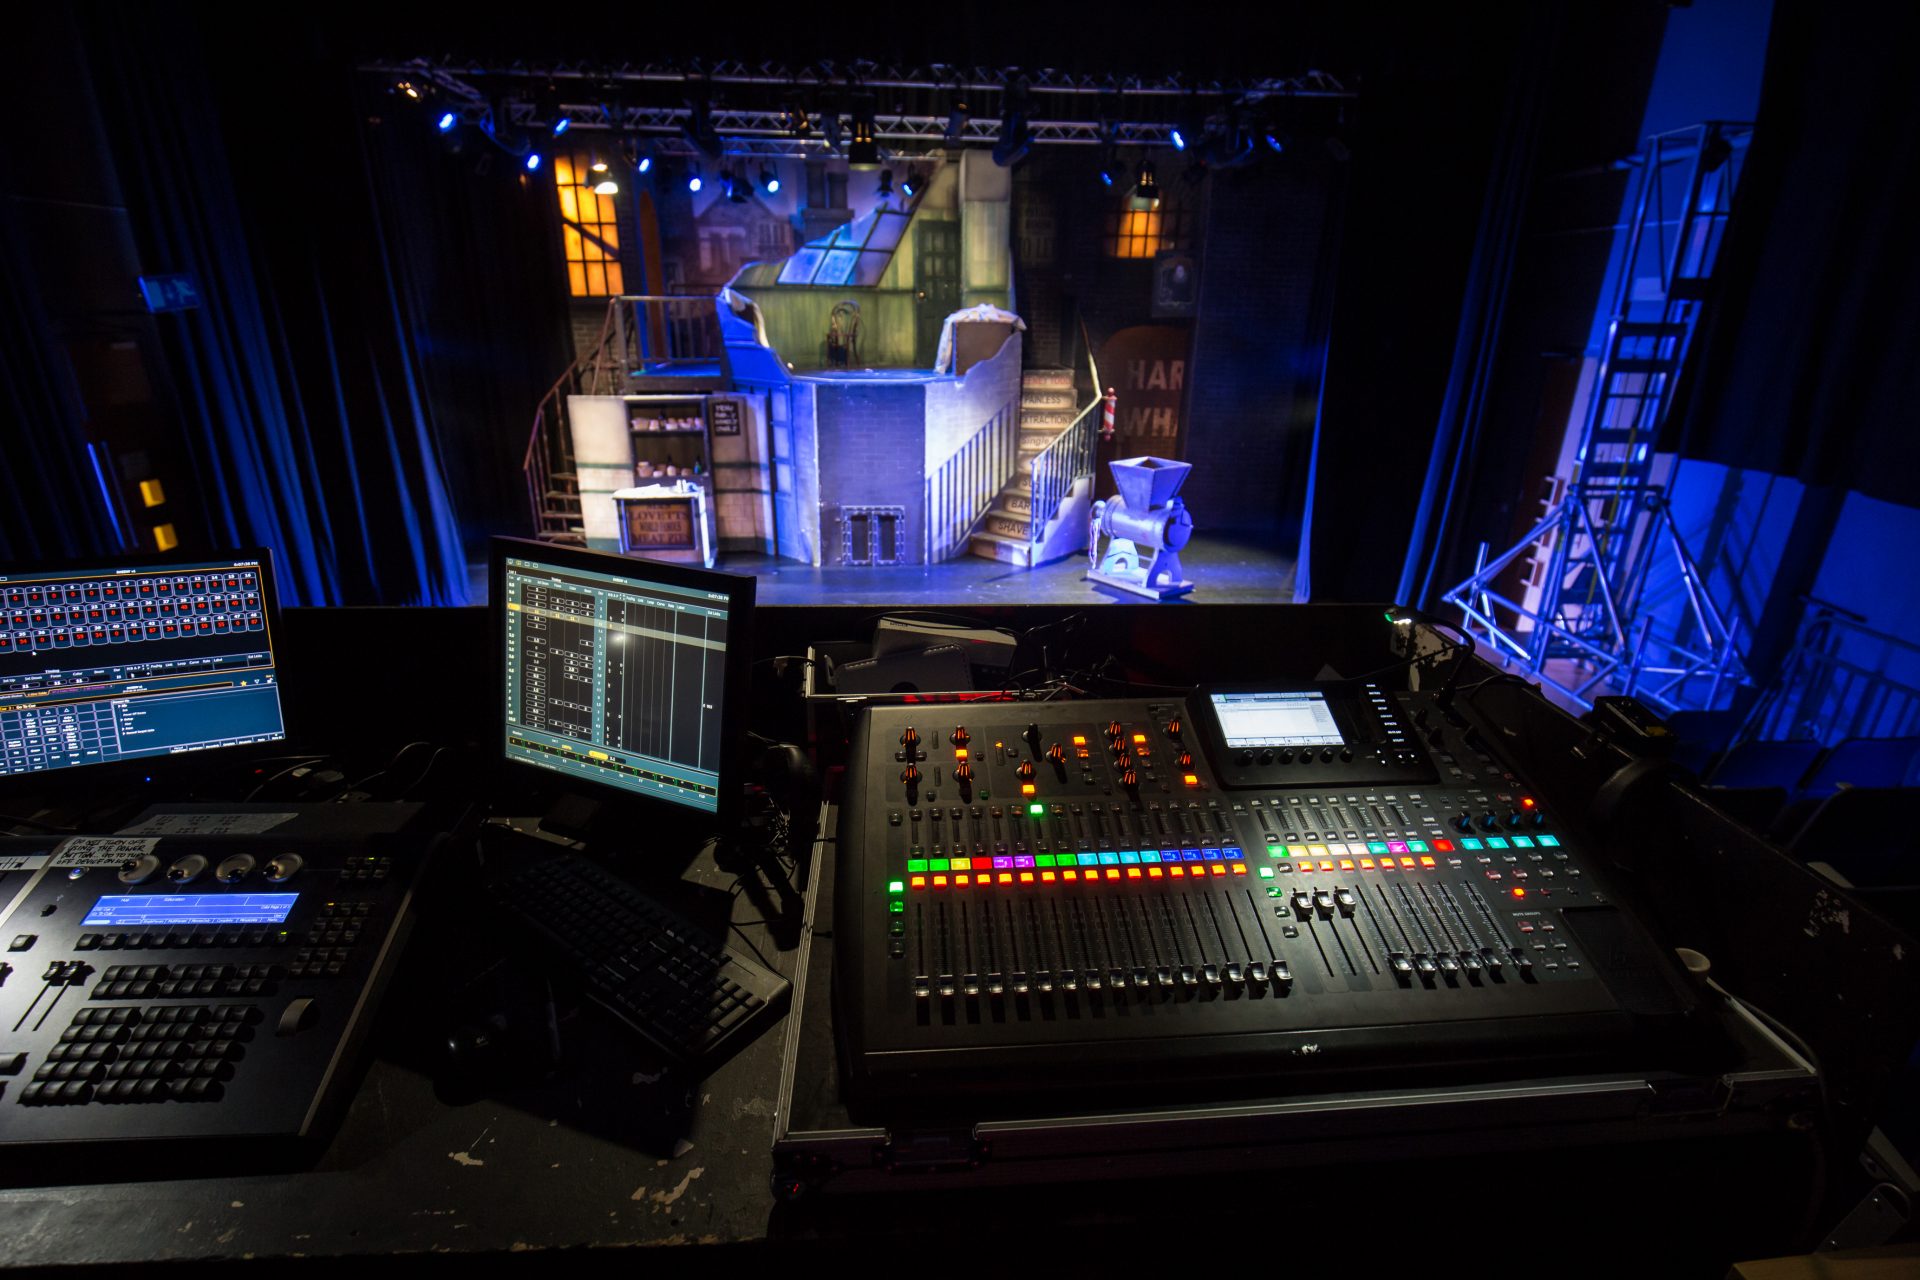 Lighting and sound technology on stage.